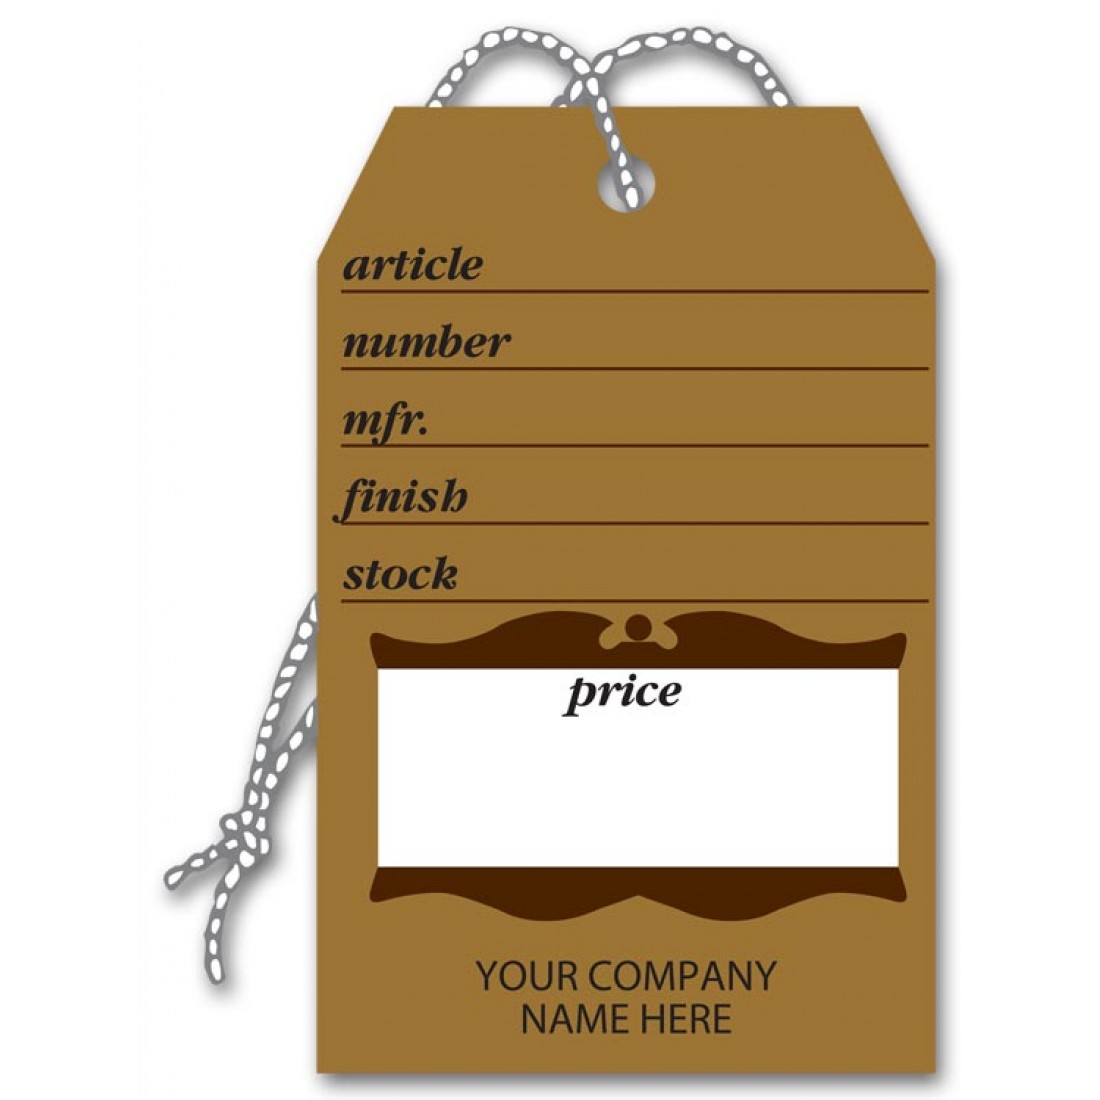 price tags for furniture